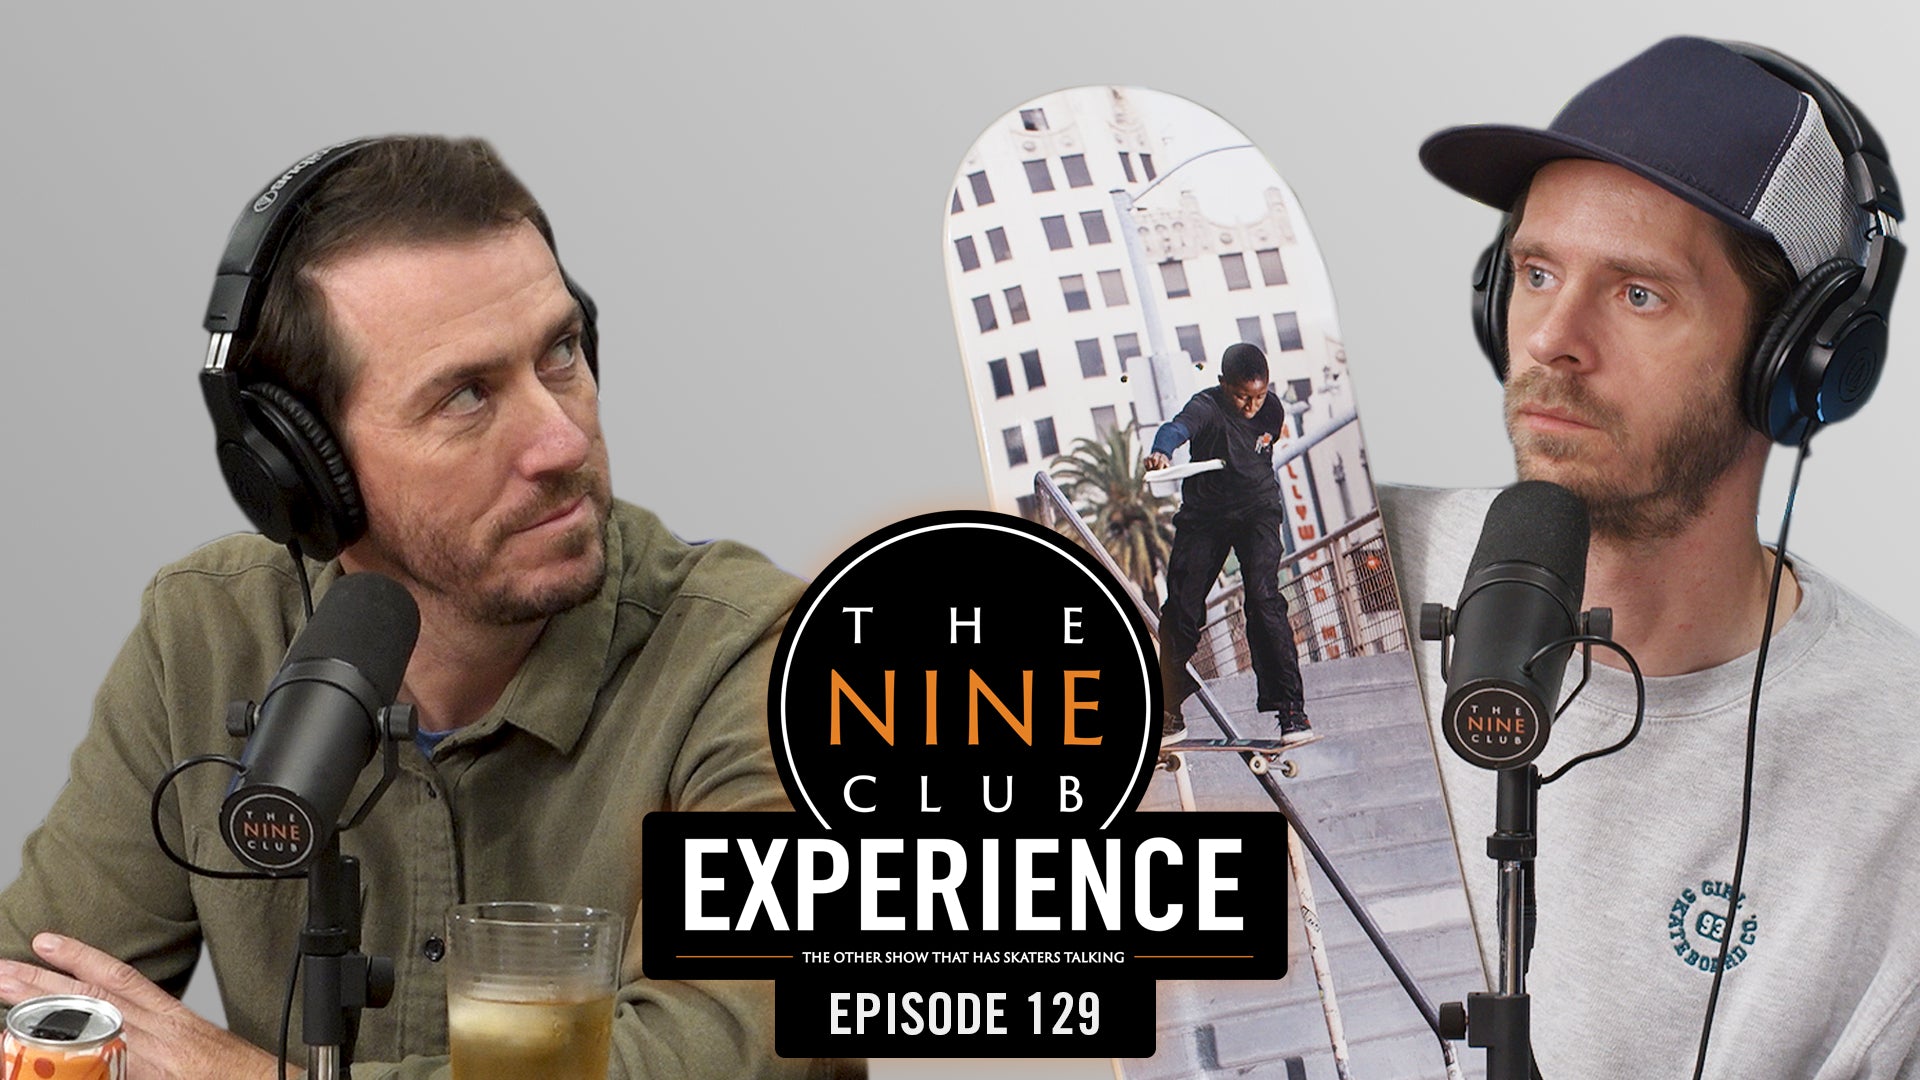 The Nine Club Experience Episode 129